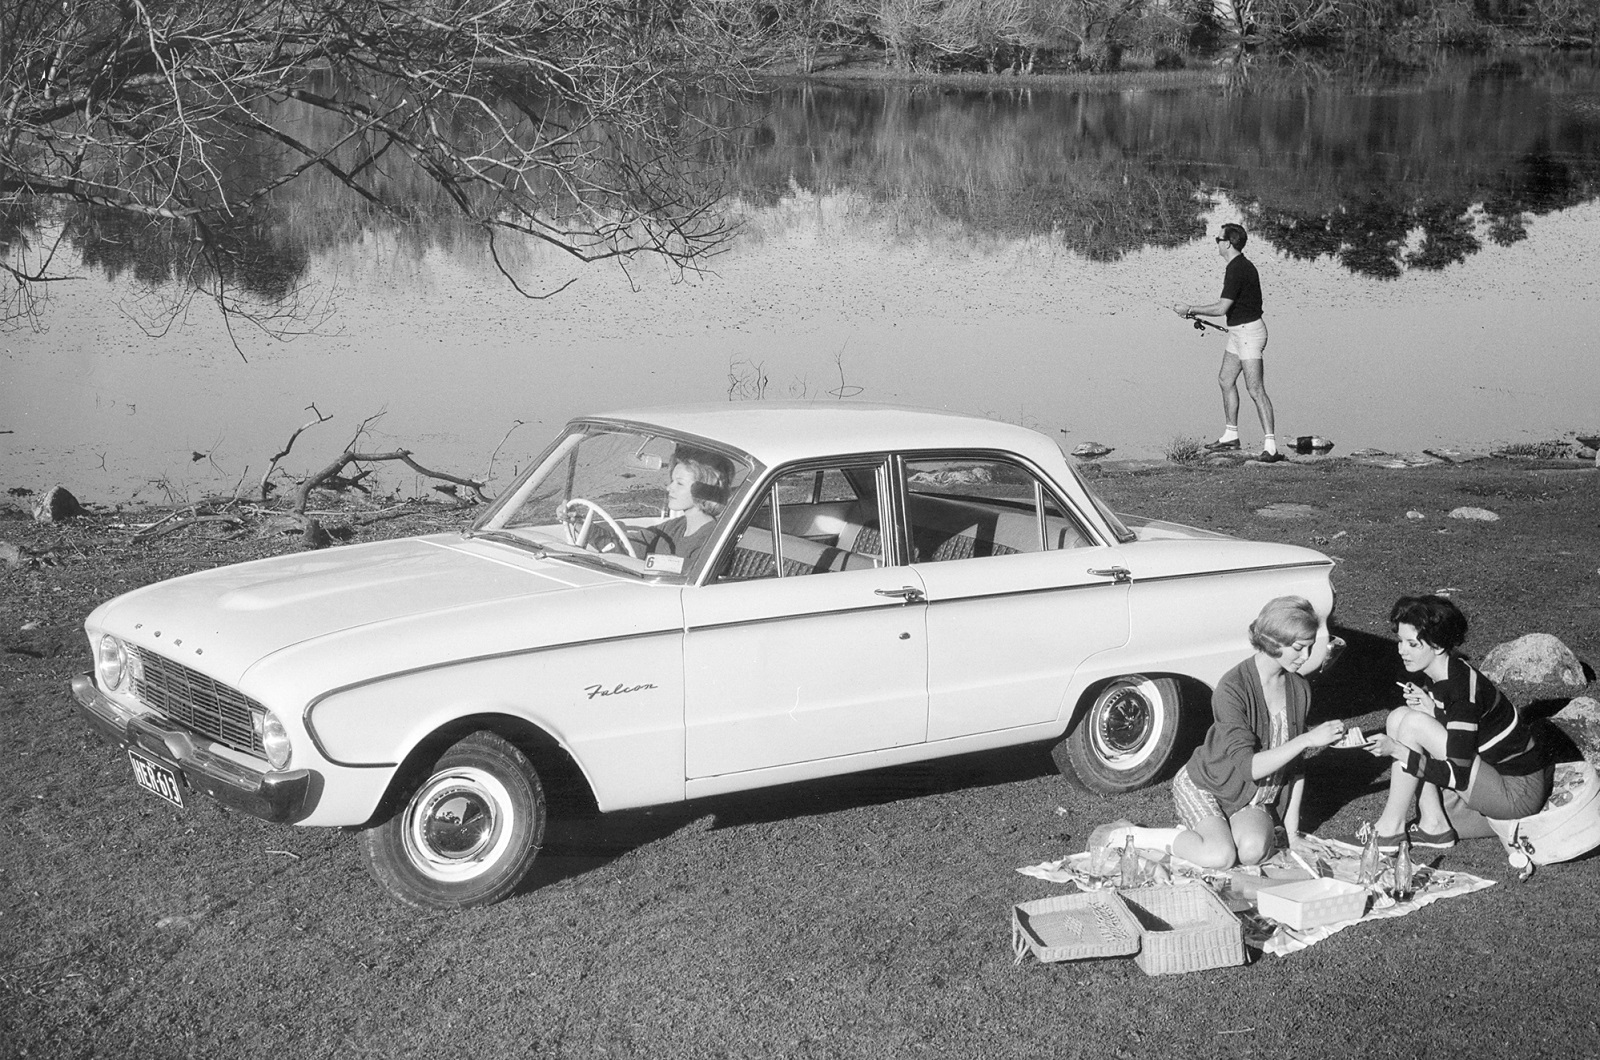 <p>Ford brought the Falcon to Australia in <strong>1960</strong> to lure buyers out of Holden showrooms. Initially, Australia’s Falcon was closely related to the American model but it received market-specific tweaks, like a heavy-duty suspension system and, of course, right-hand-drive. It was far more popular than Ford of Australia’s earlier saloons, which mostly traced their roots to the UK, so the range grew in the 1960s.</p><p>It took only a few years for the Falcon to become a common sight on Australian roads and race tracks. Later variants of the Australian-built Falcon were developed locally, and the nameplate survived much longer than it did in the United States. <strong>Seven generations</strong> were built over the course of <strong>56 years</strong>.</p>